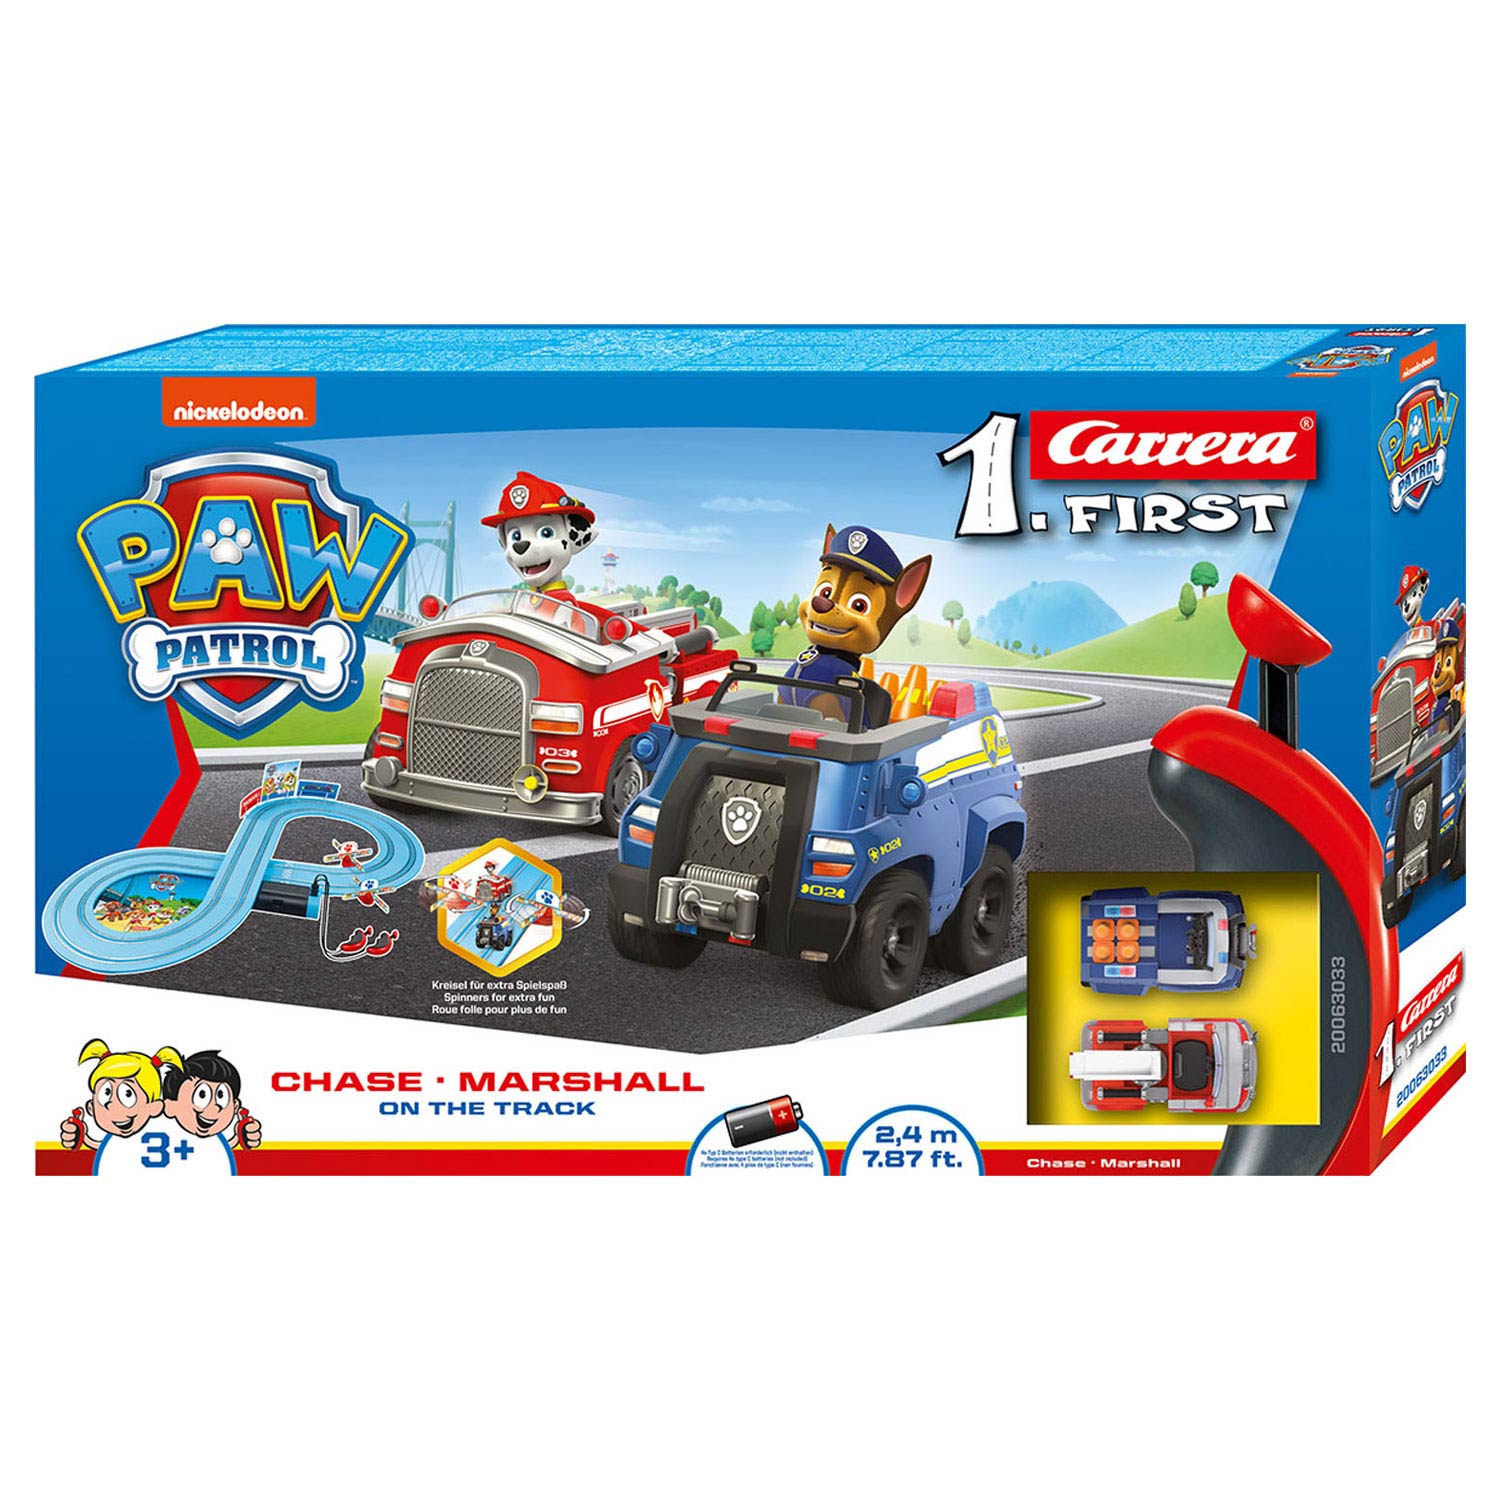 Carrera First Race Track - PAW Patrol 'On the Track' | Thimble Toys